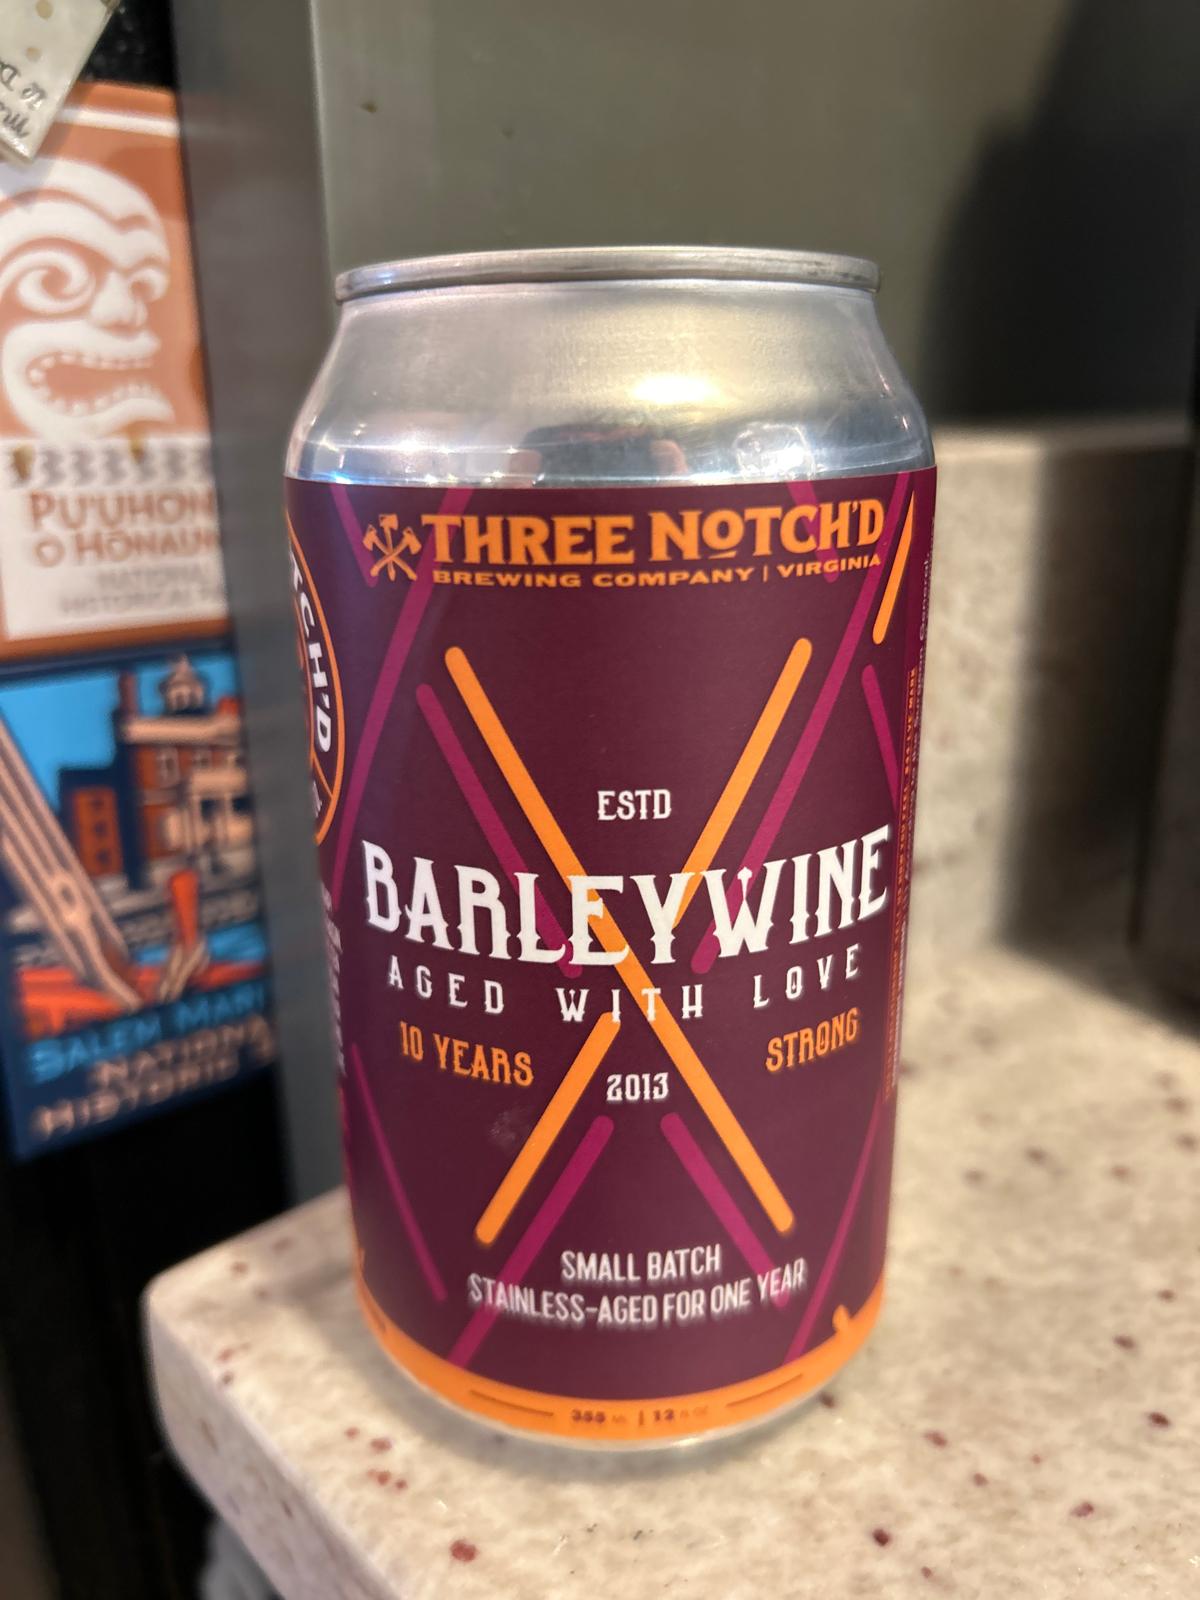 Barleywine Aged with Love (Stainless Steel Barrel Aged)